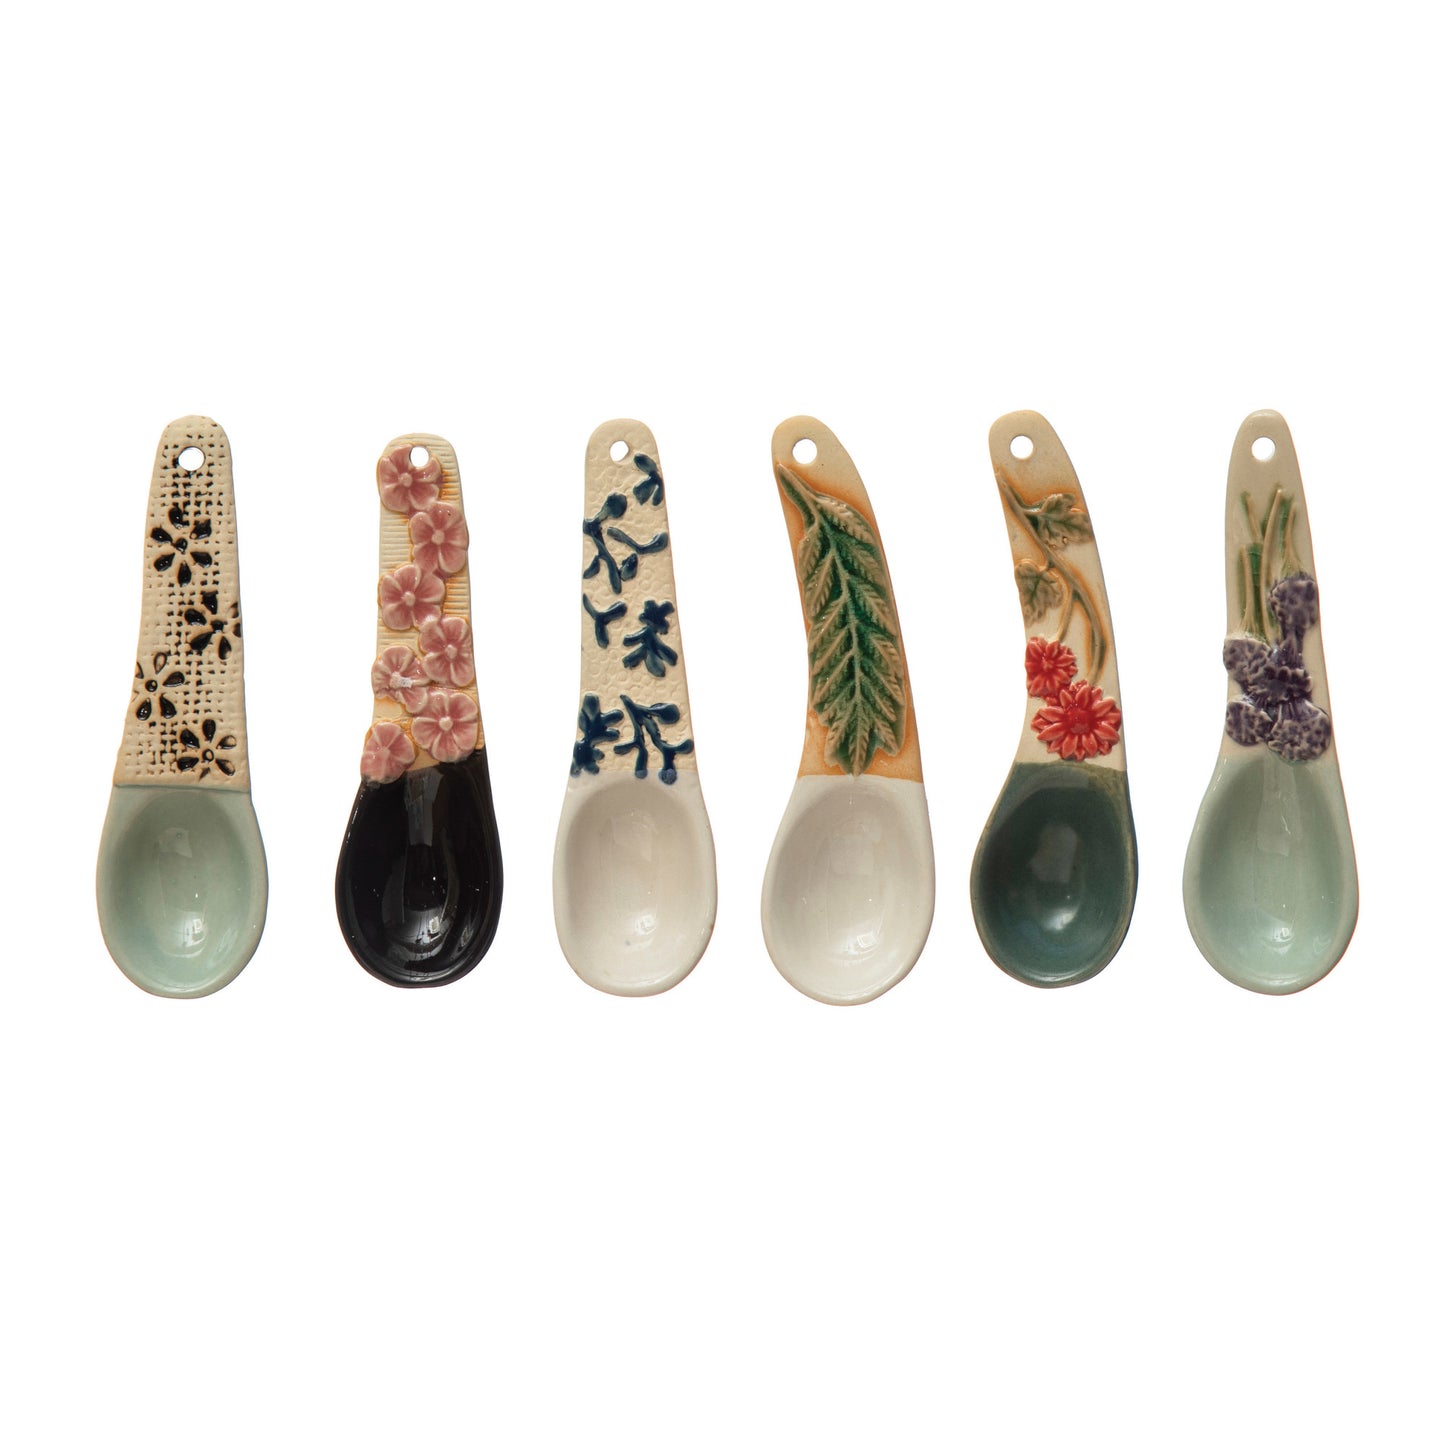 Hand-Painted Spoon with Handle